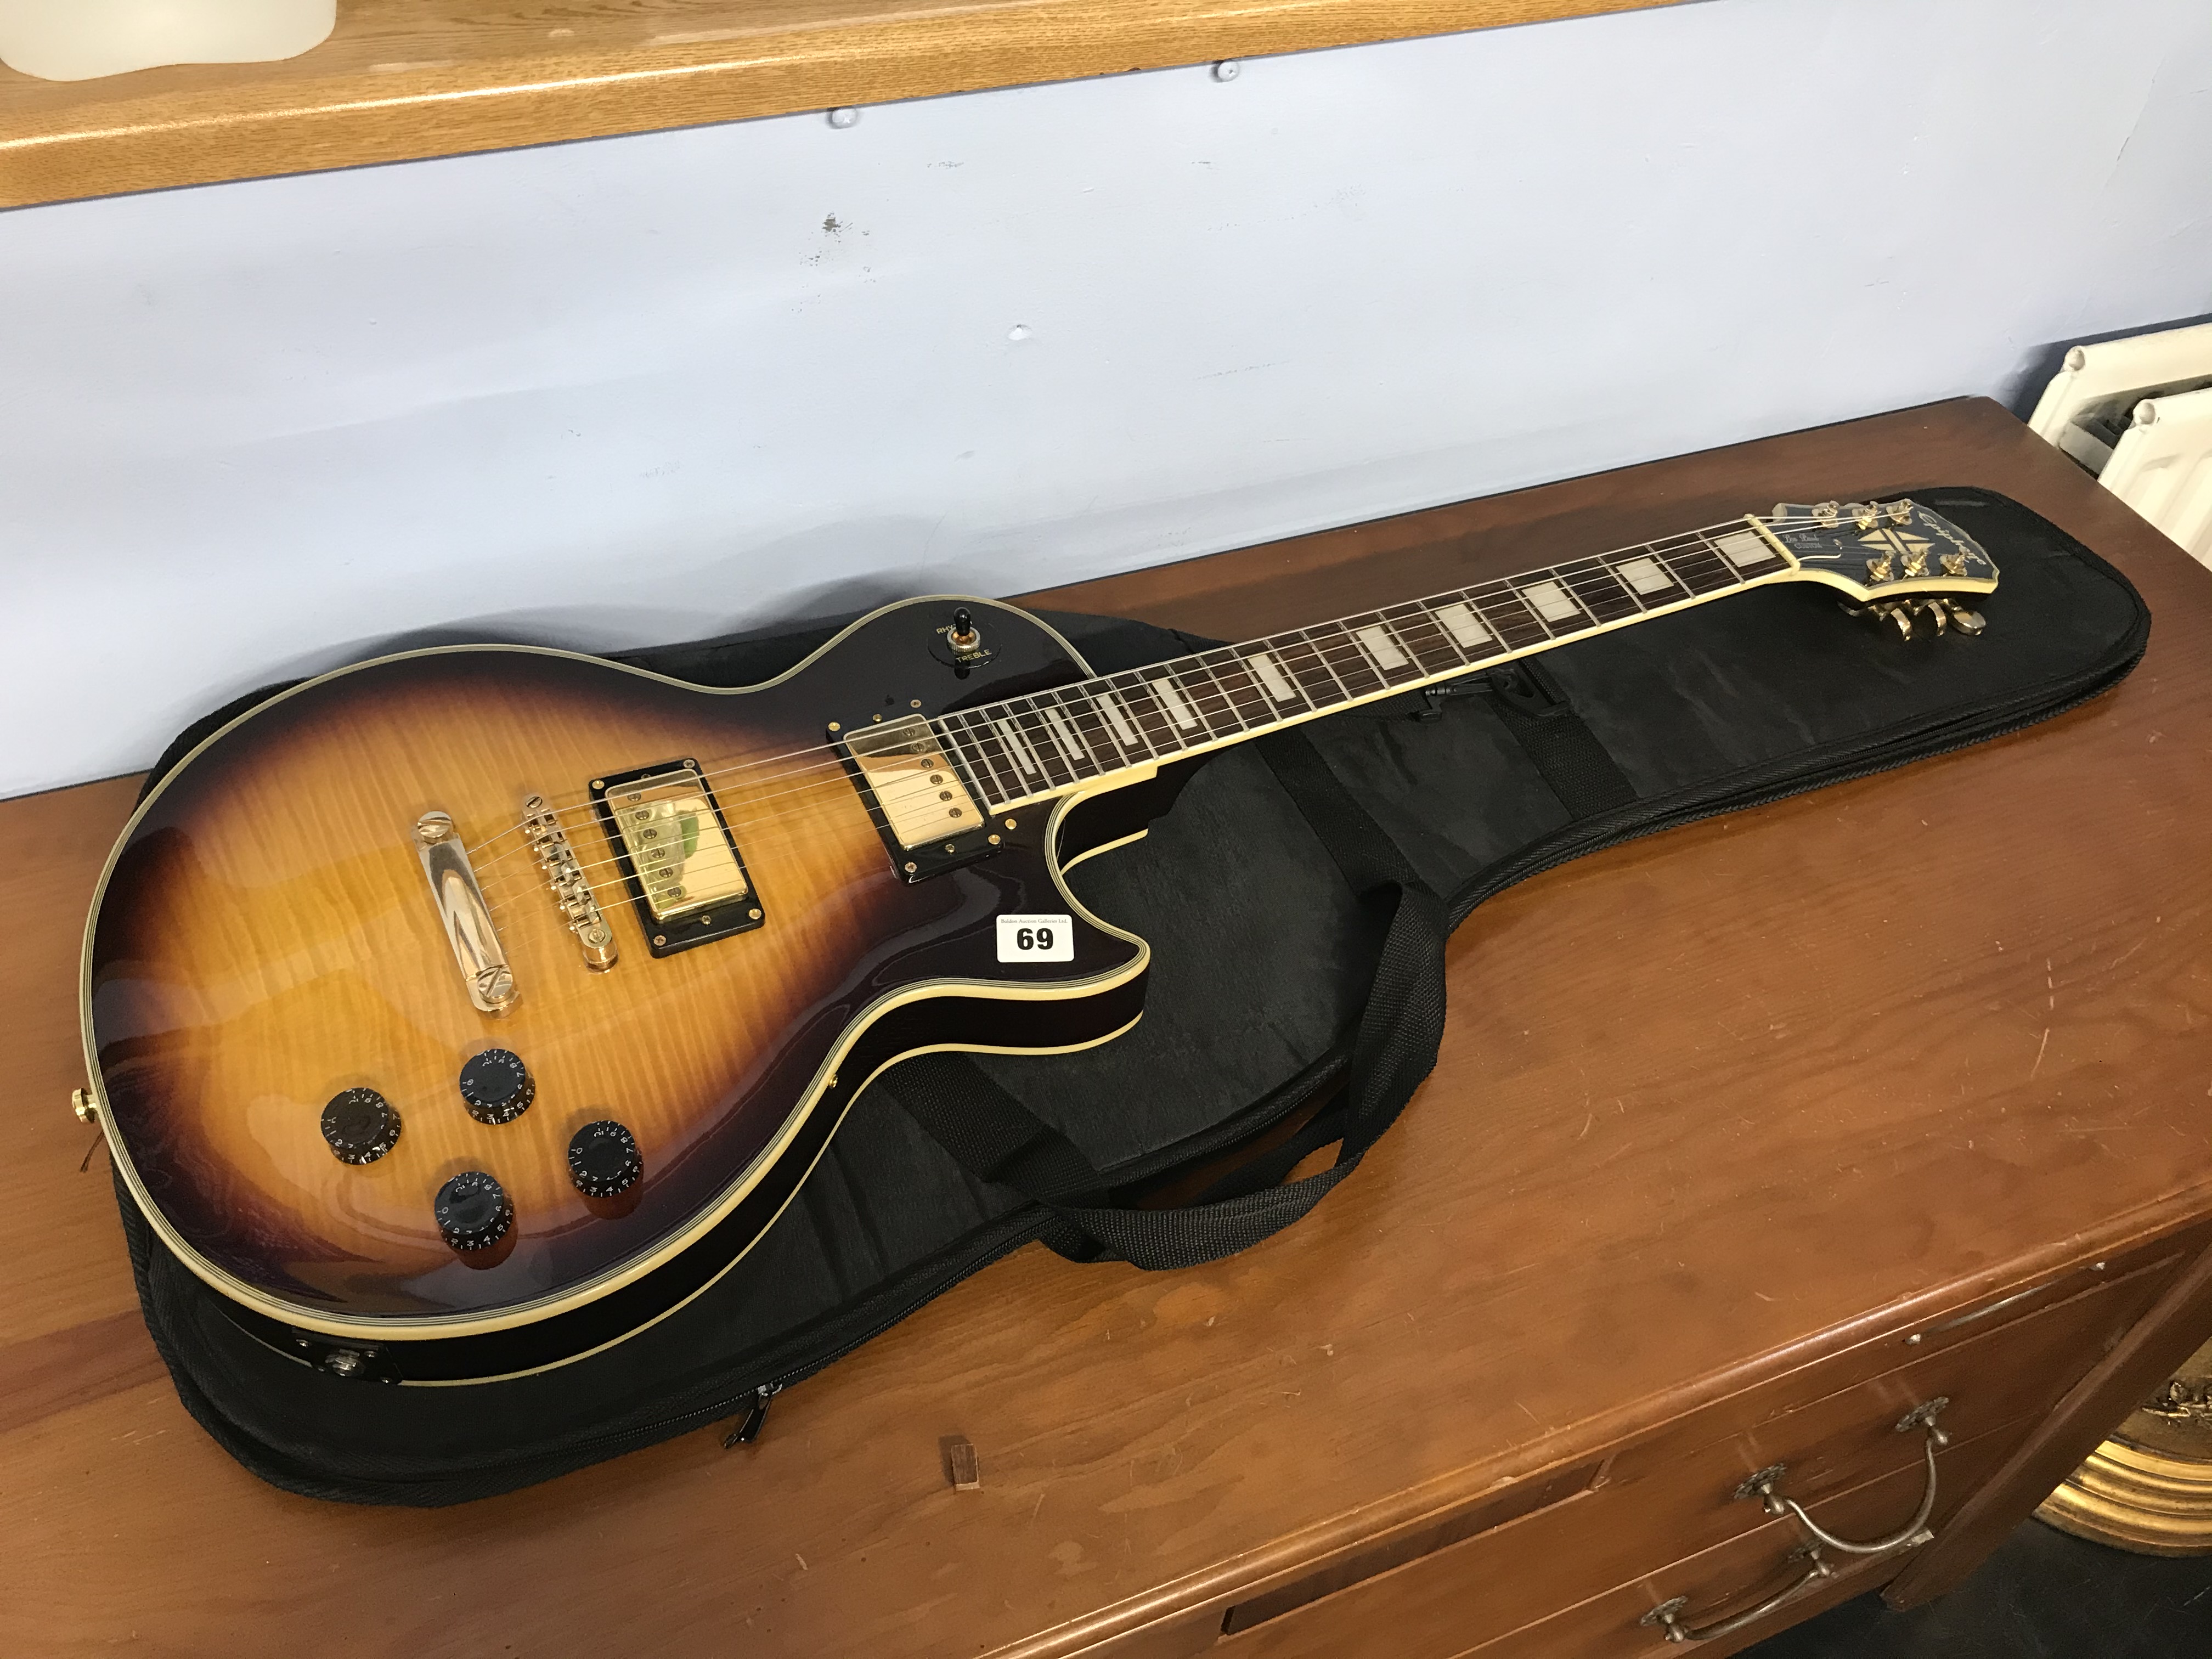 A Les Paul custom style guitar, with soft case